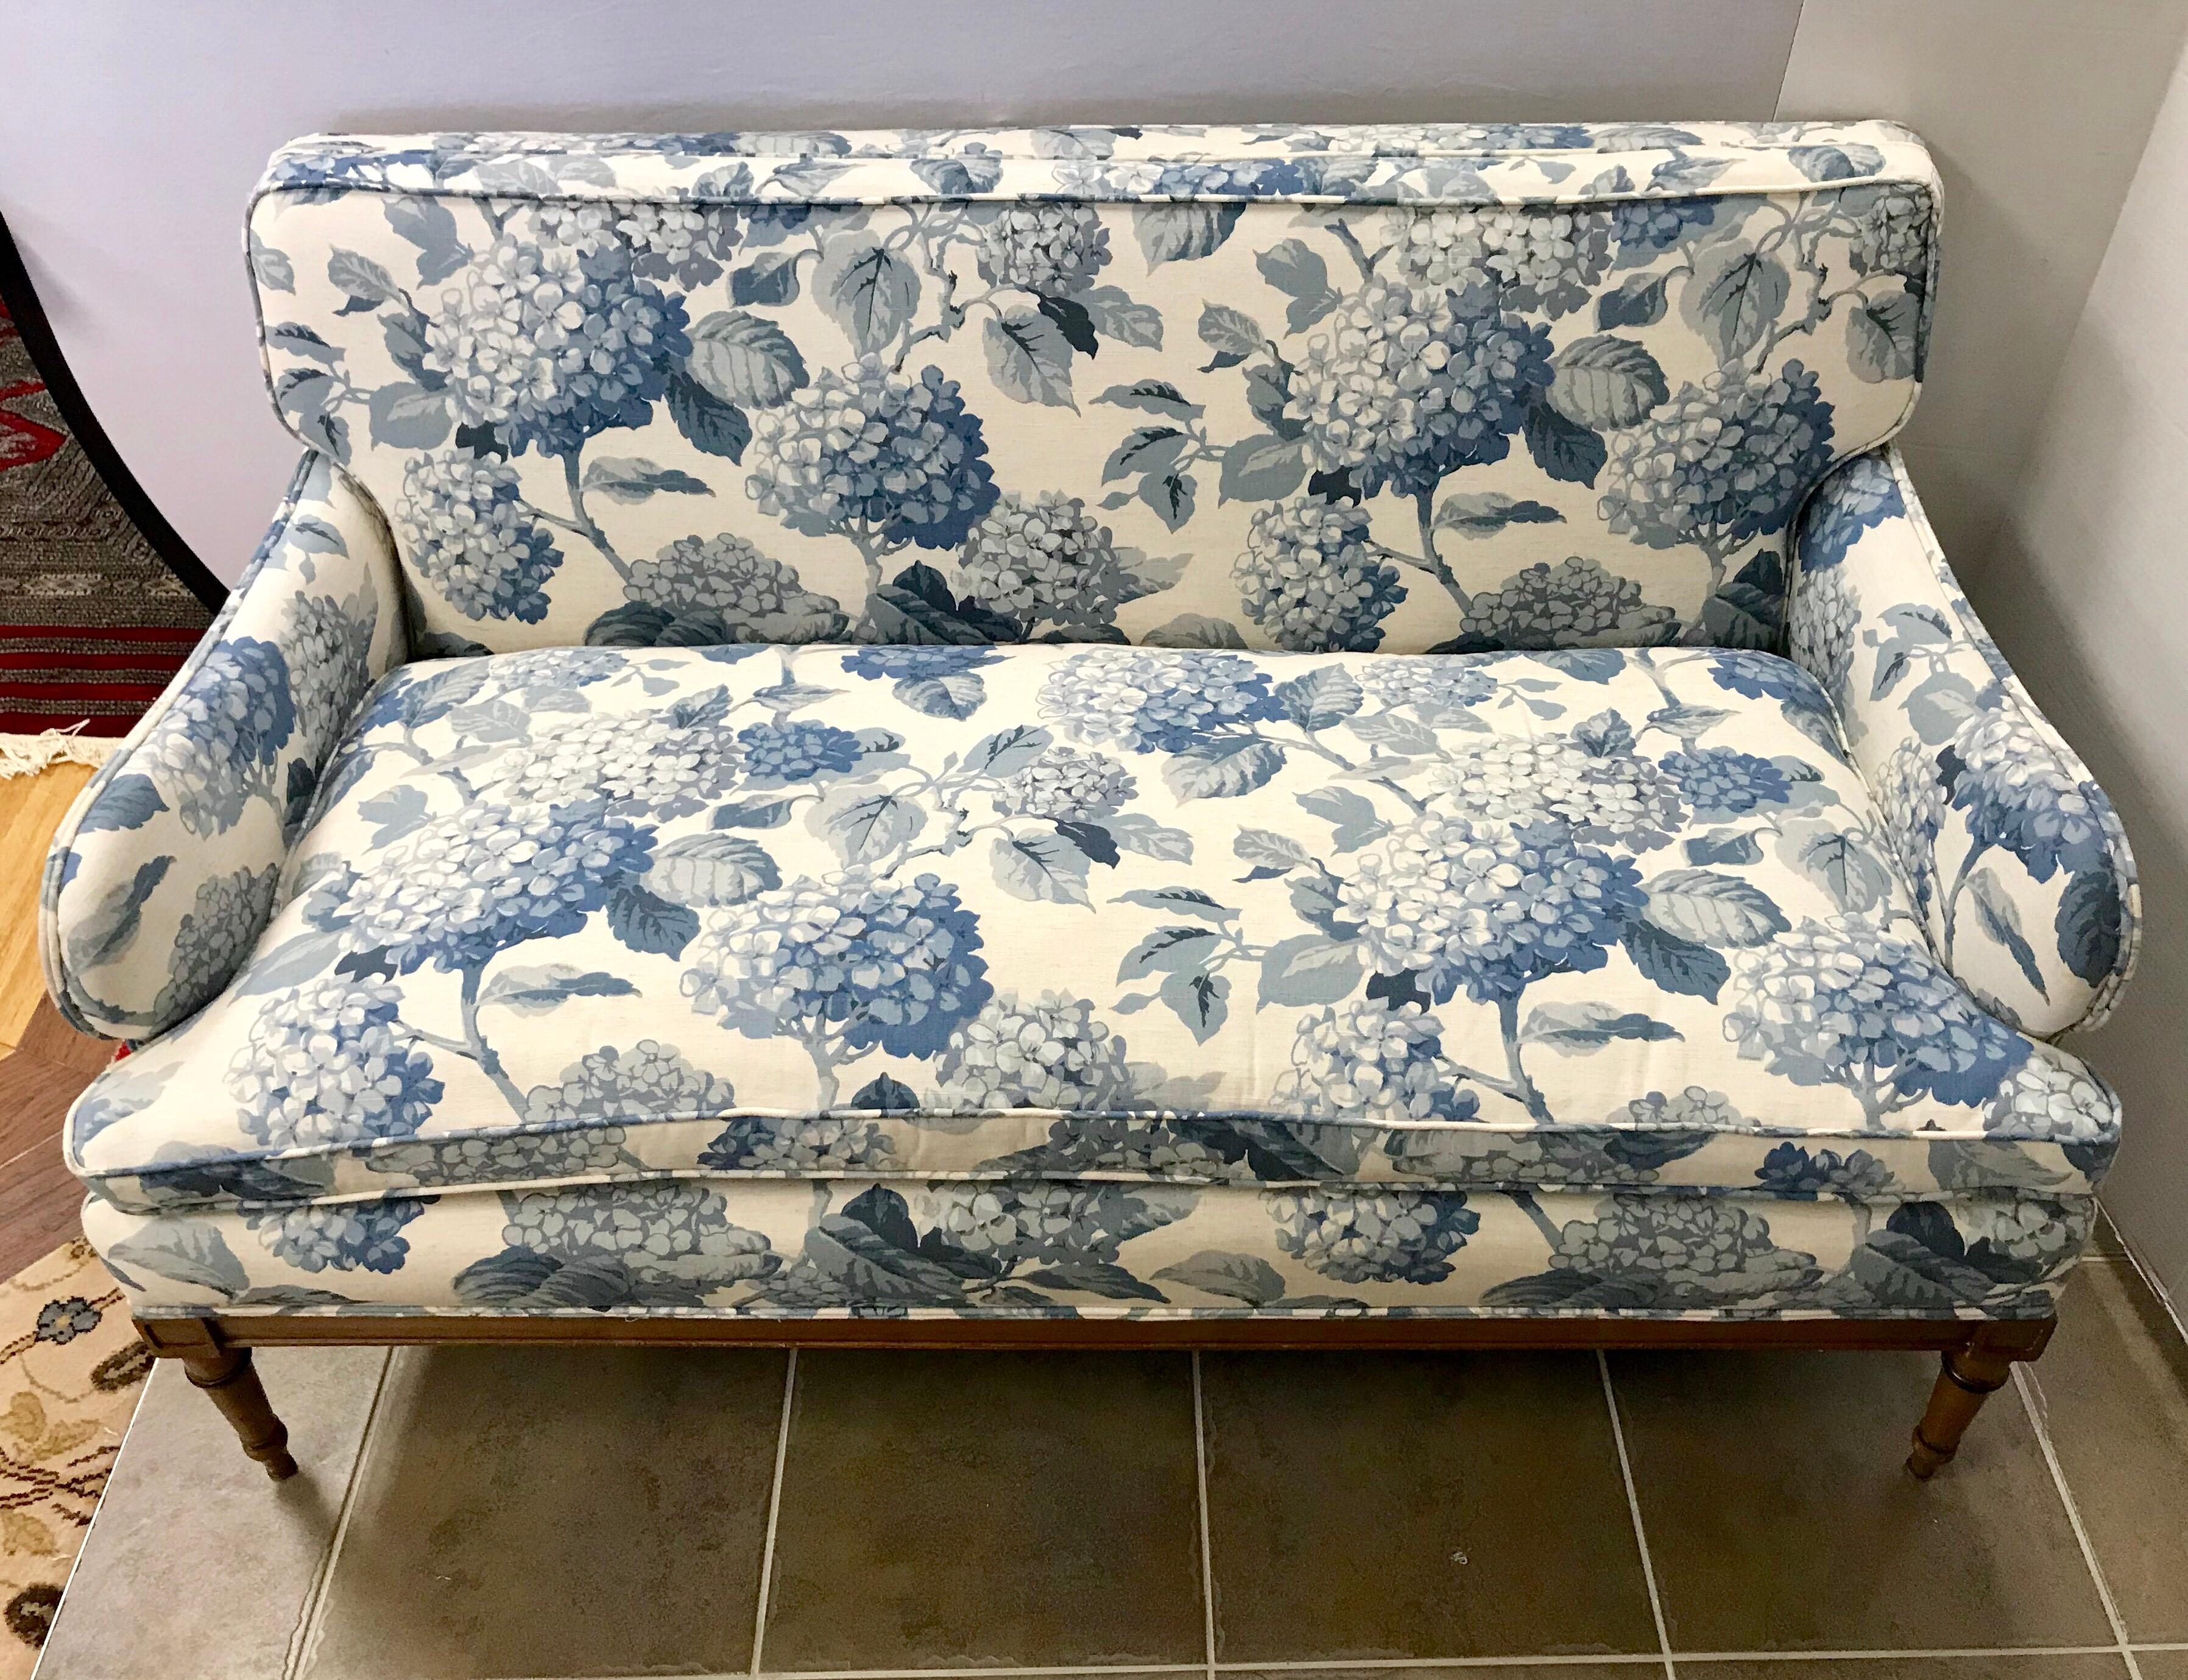 Pretty loveseat settee with new blue and white cotton upholstery with a large hydrangea print. Loose down filled seat cushion.
 